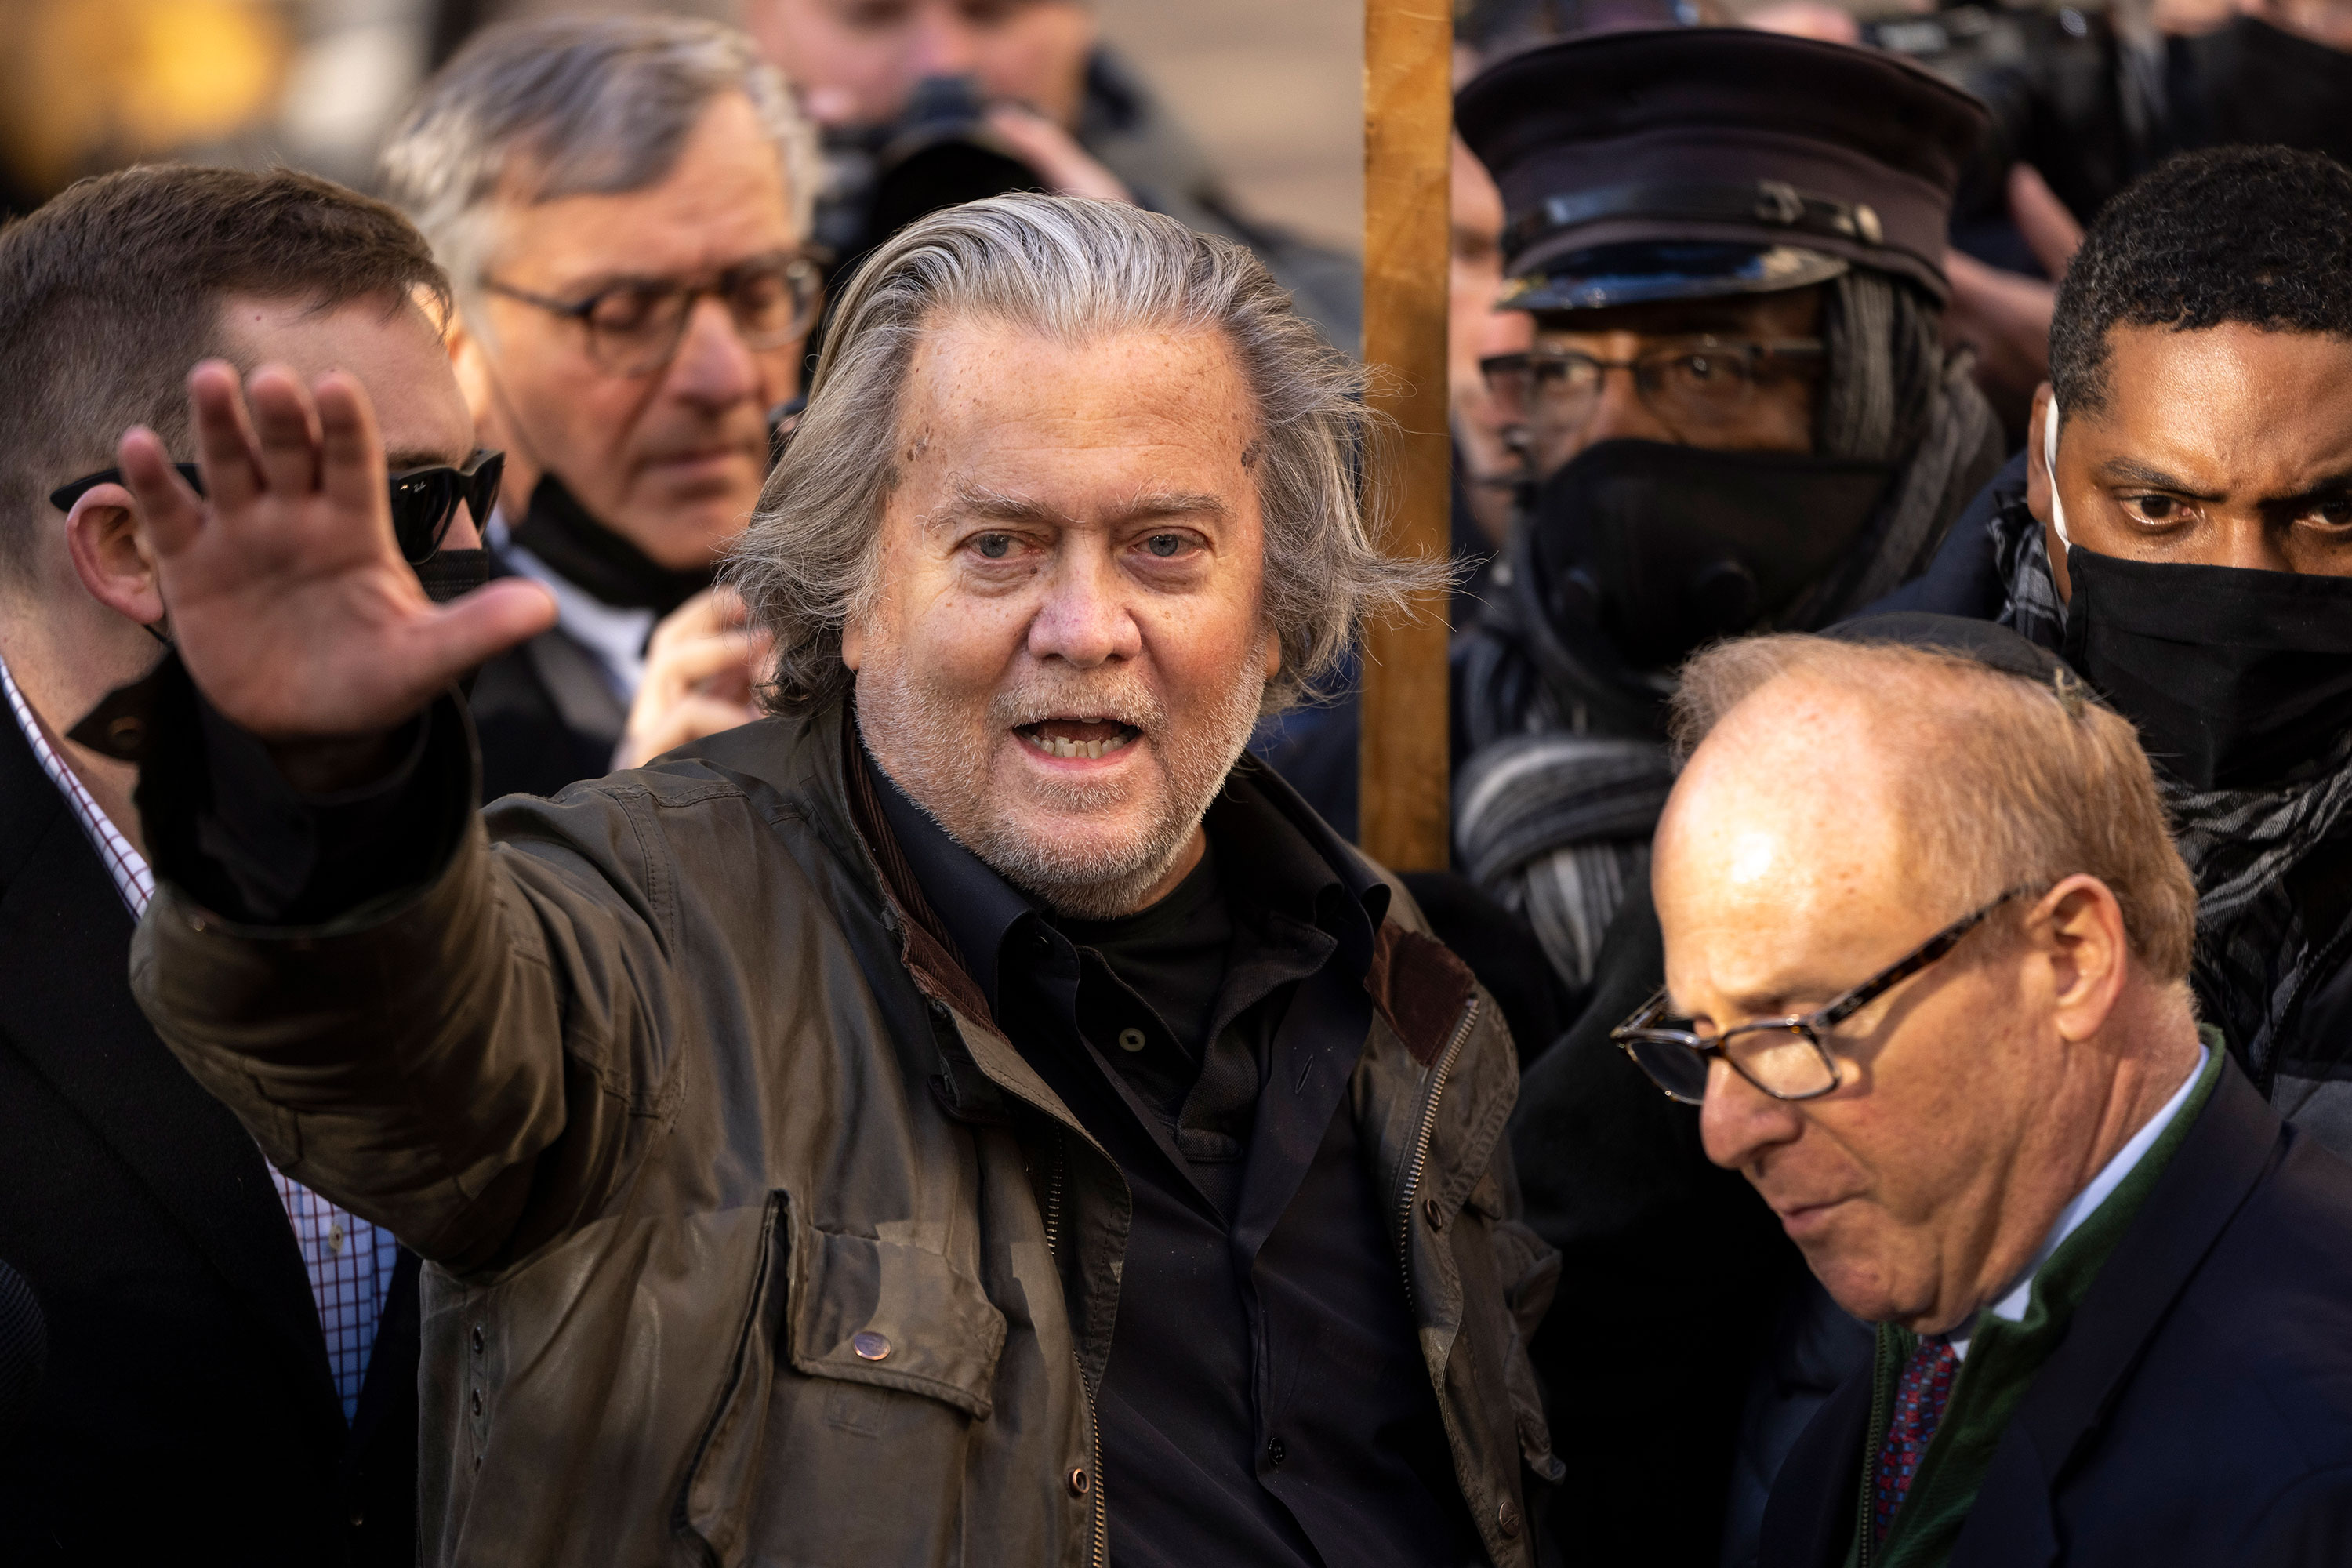 Steve Bannon waves after speaking to the press in November 2021 in Washington, DC.